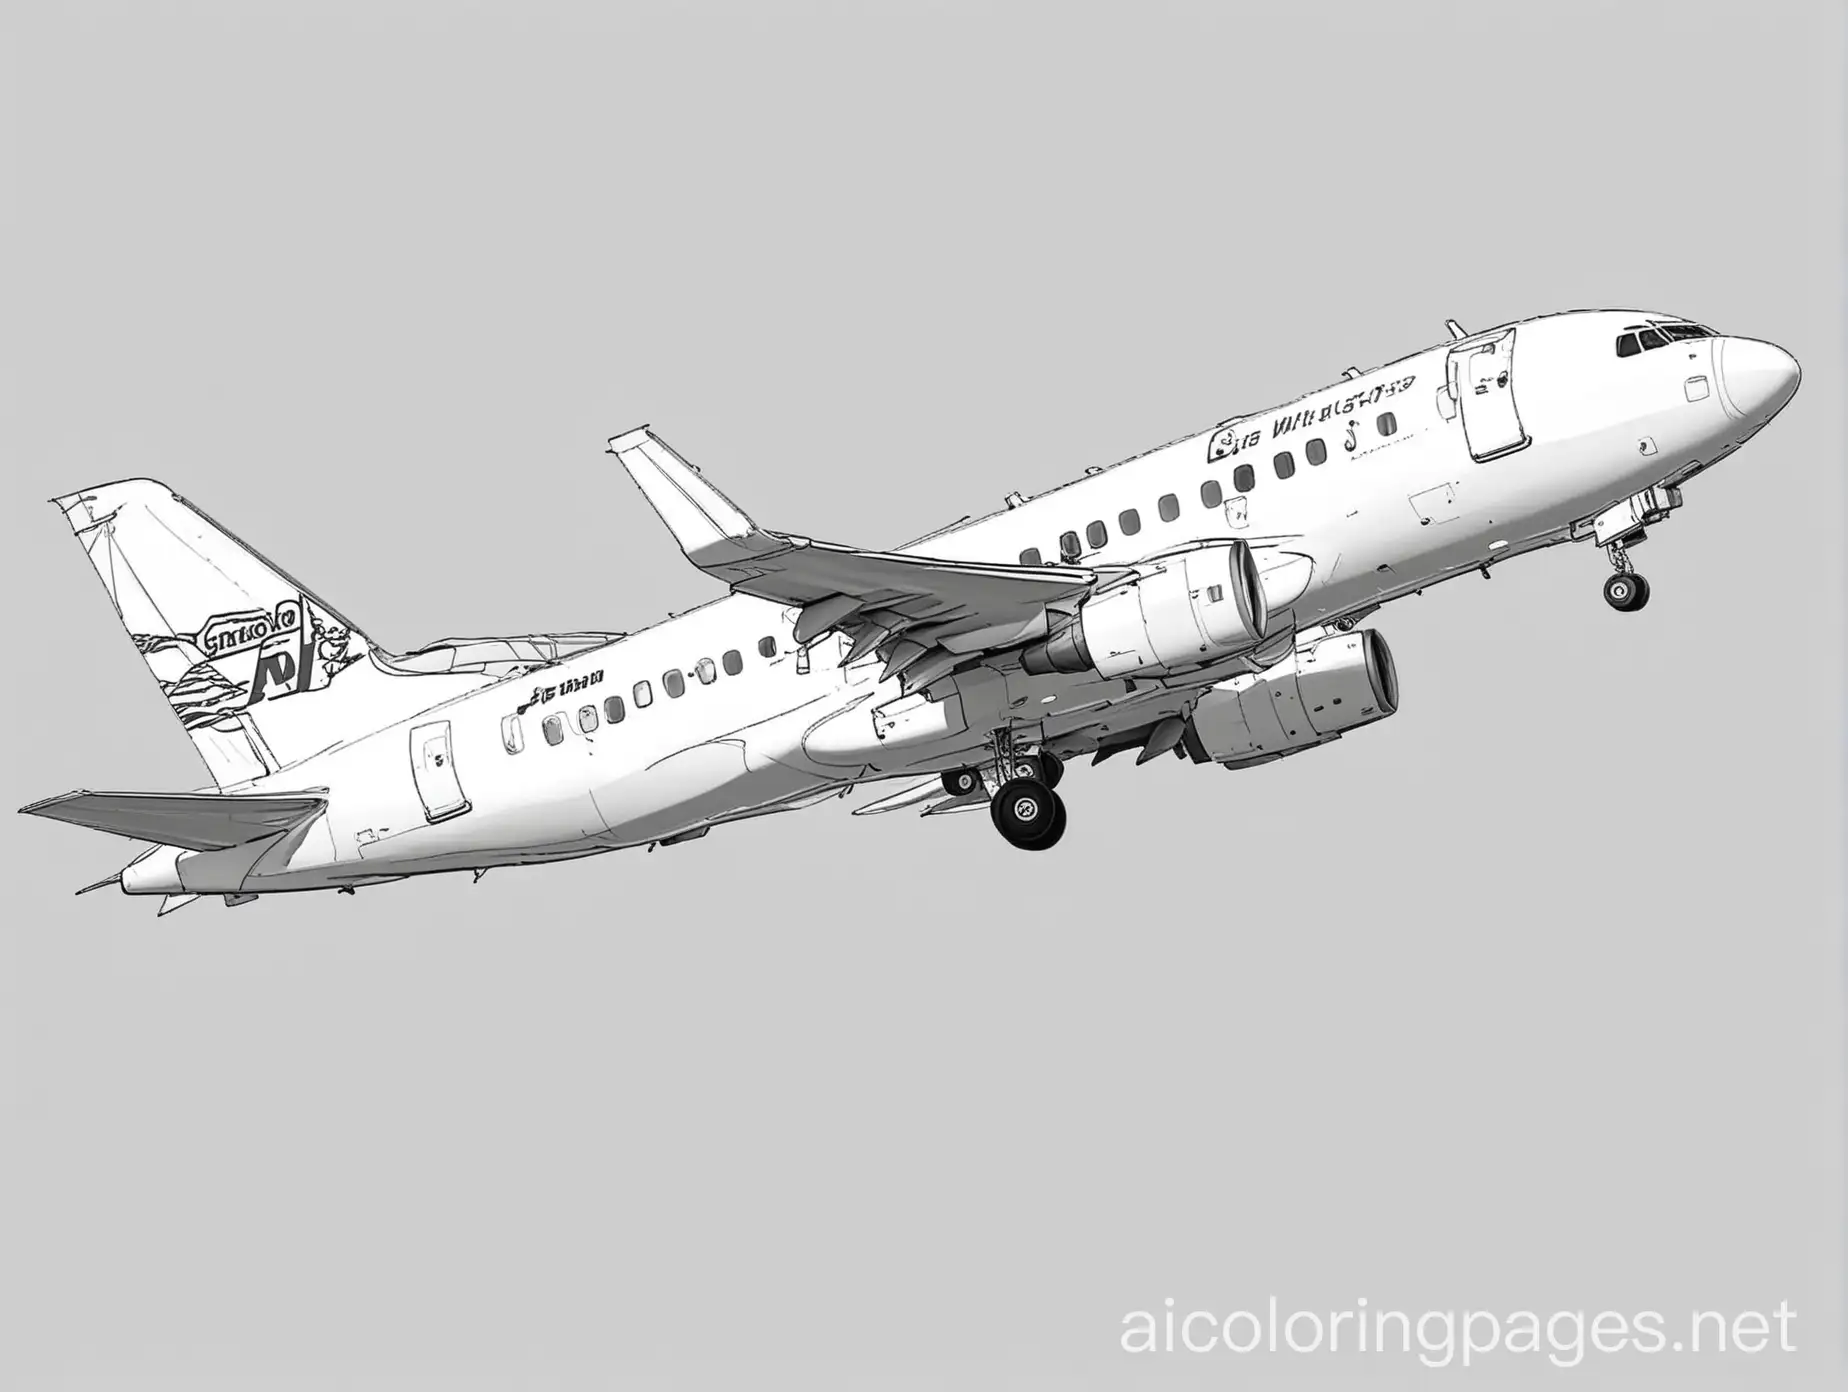 Passenger-Airline-Coloring-Page-Simple-Line-Art-on-White-Background